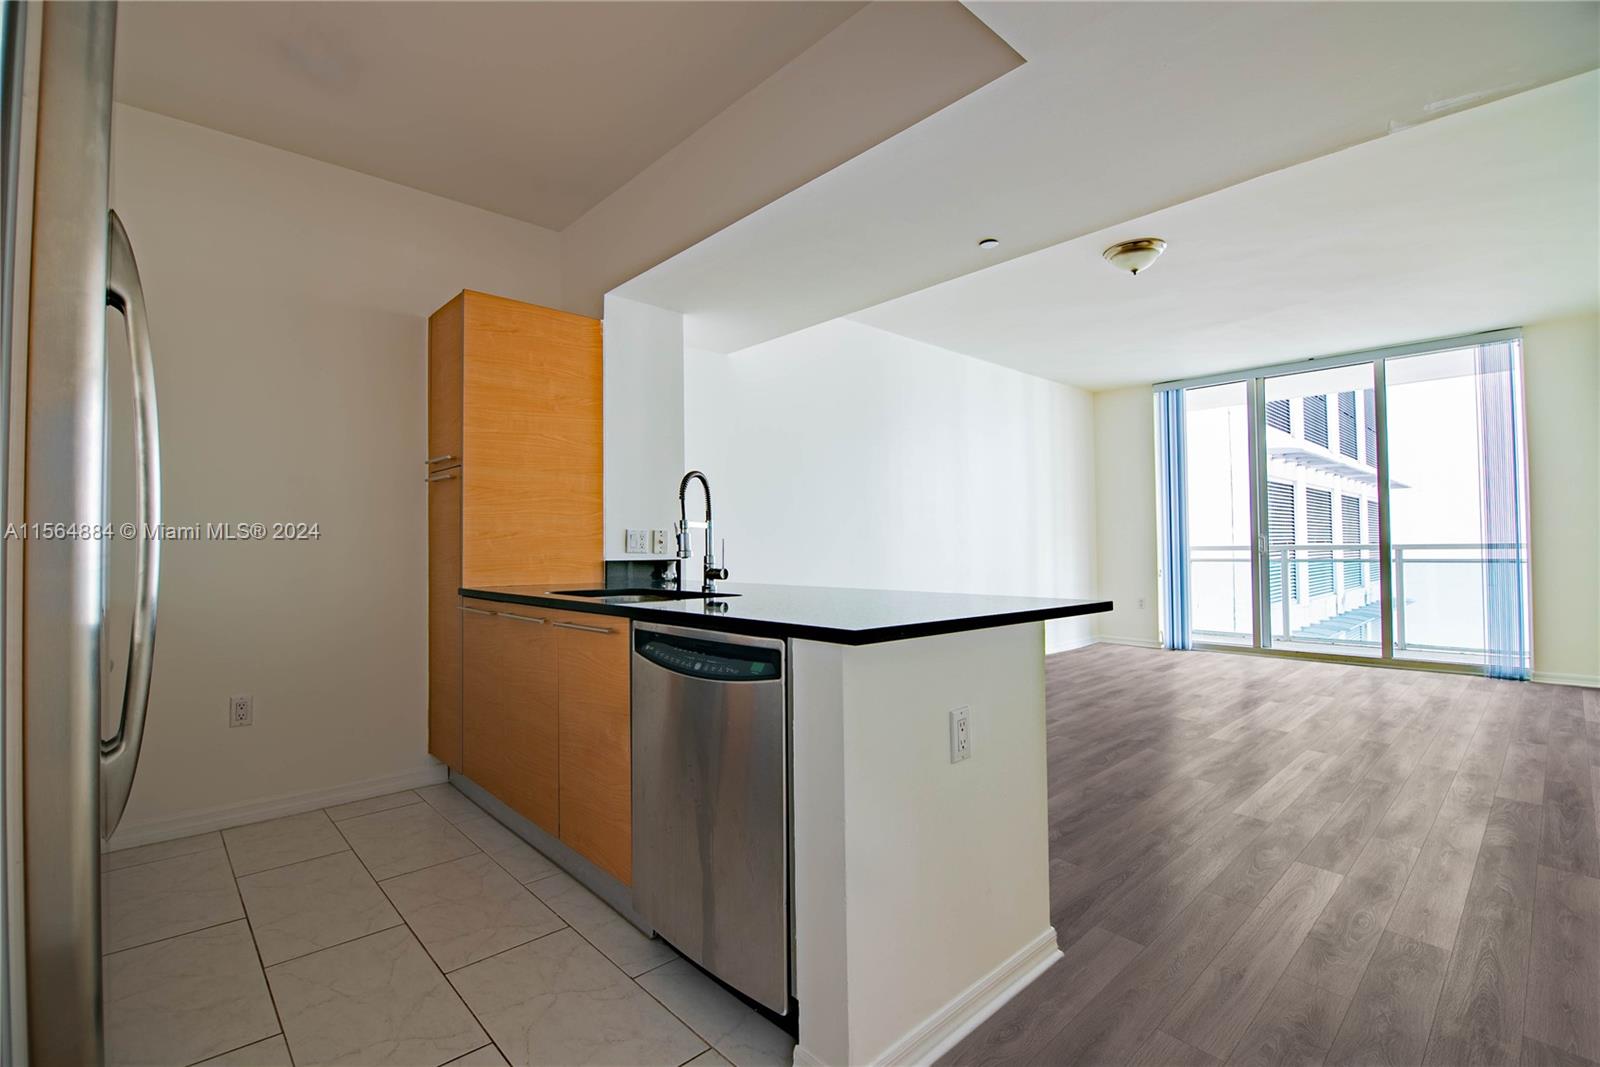 Conveniently park on the same floor as unit- no need to take an elevator! Priced to attract attention, this pristine 1/1 with new flooring, a spacious walk-in closet, and floor to ceiling windows, is nestled in the heart of Brickell- Miami's vibrant financial hub. The walkability factor is unmatched, providing the pleasure of strolling to the finest restaurants, chic shopping destinations (Brickell City Center, Mary Brickell Village), grocery stores, and the metrorail. Plaza is one of Brickell's most well-maintained buildings, featuring a fitness room, beautiful pool area, a children's play room, party room, business center, 24 hour security and more. HOA includes basic cable, internet, water! Lenient pet policy. Great for investors or end users- can be rented for minimum 30 day period.